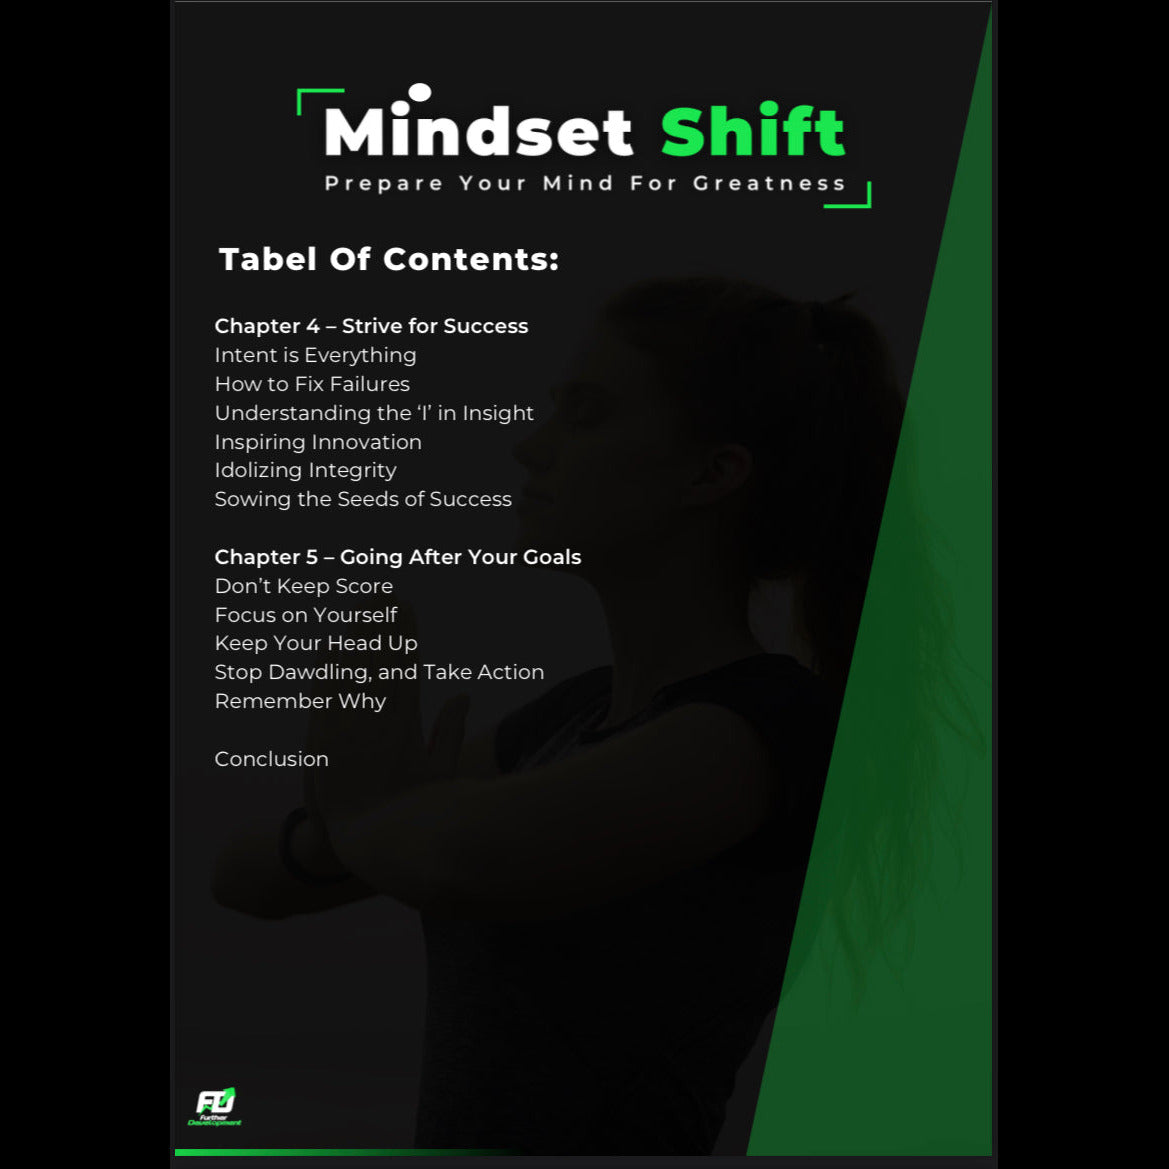 Mindset Shift - Prepare your mind for greatness